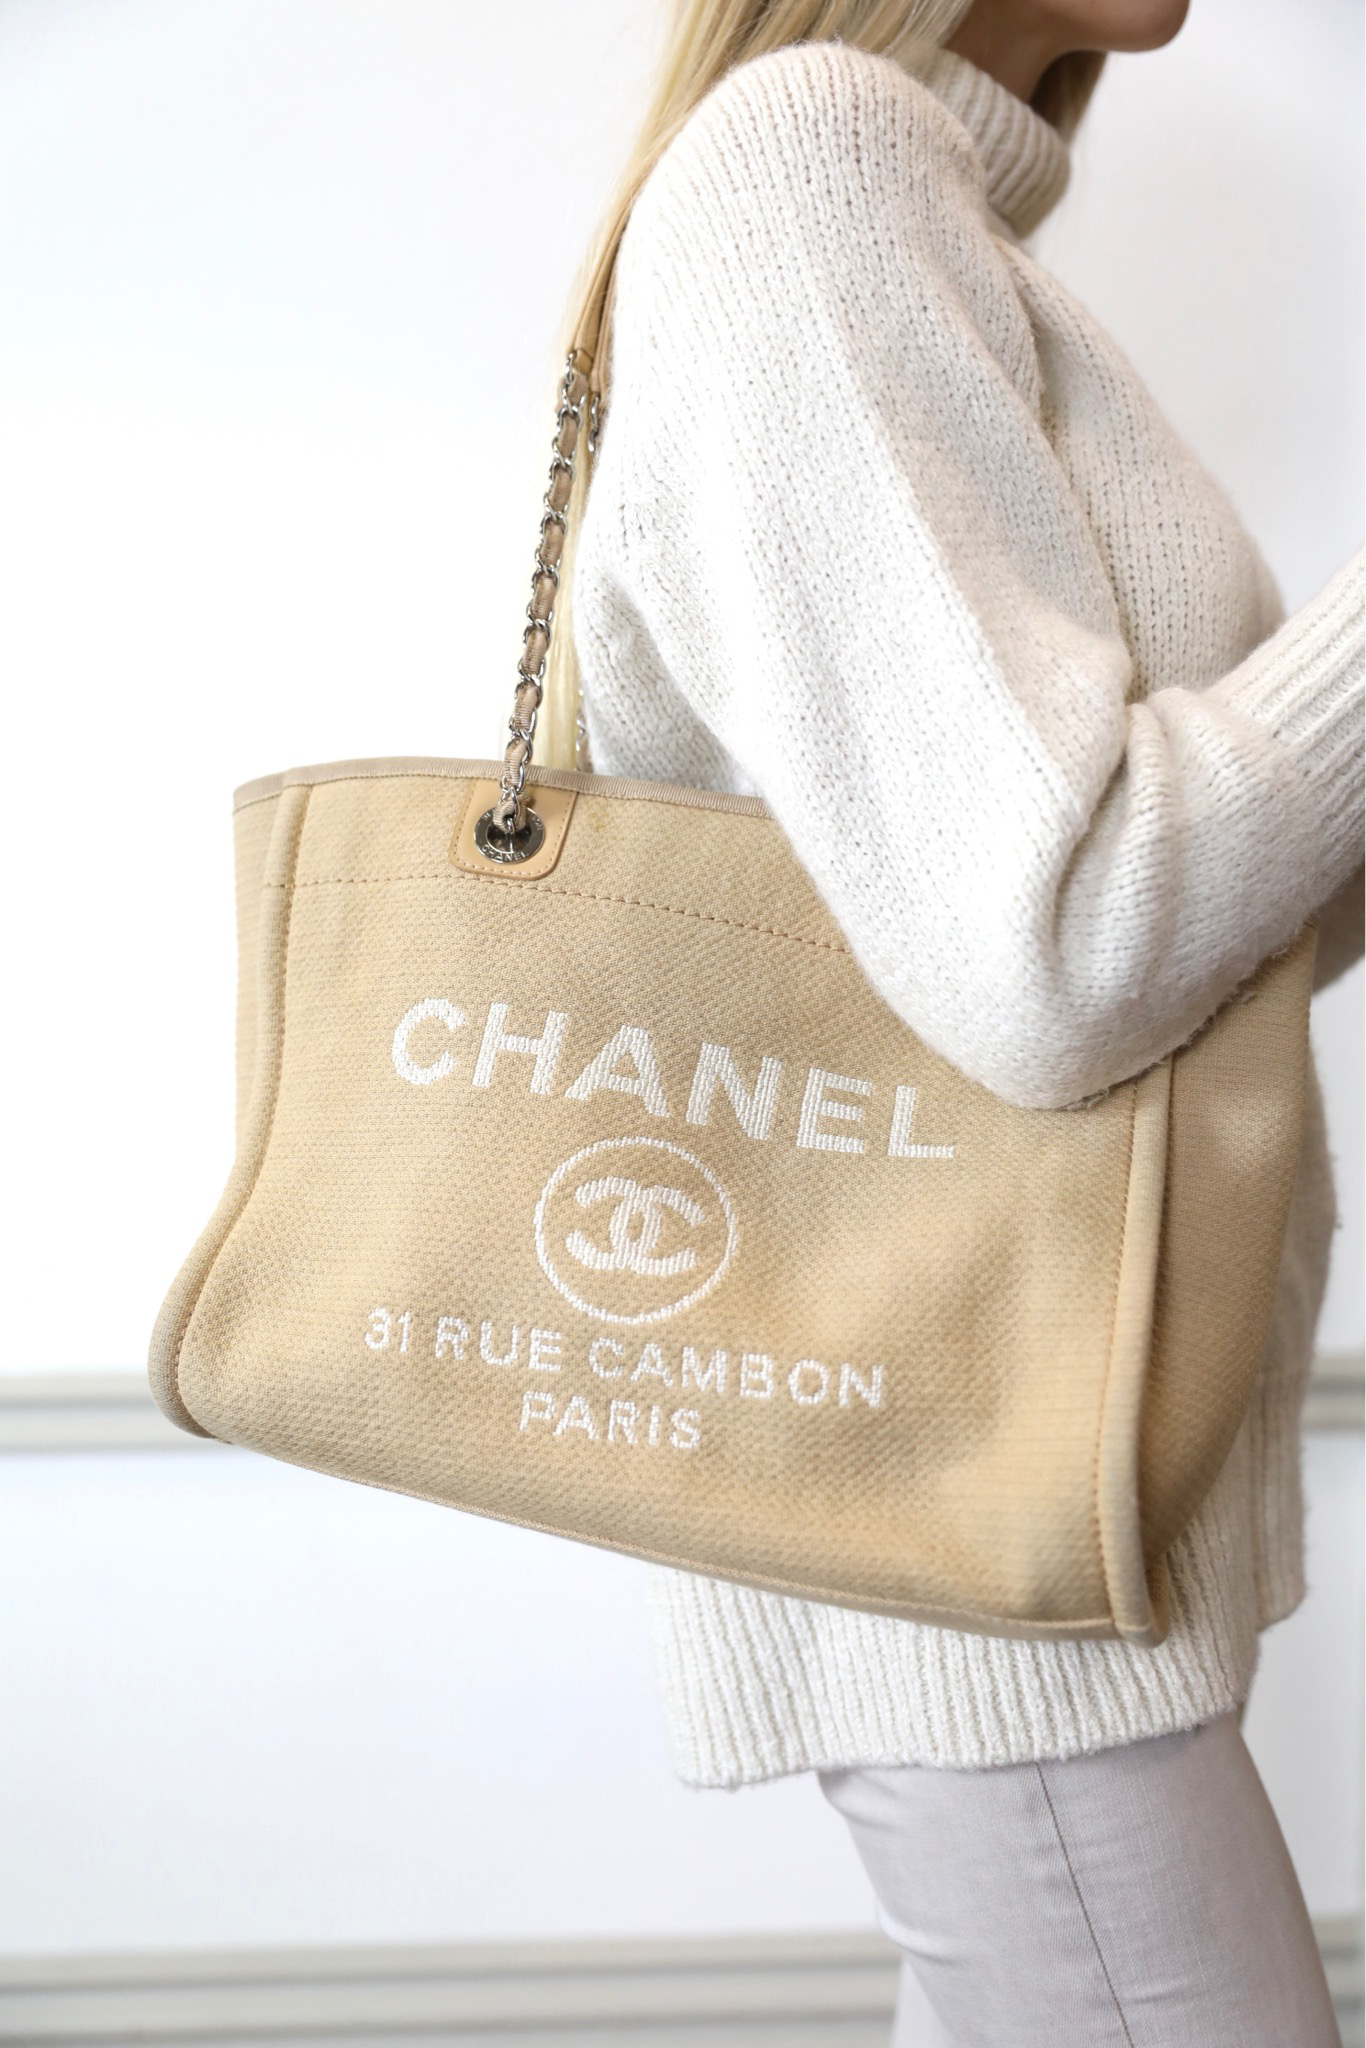 NEW Chanel Deauville SMALL Totes (sizes, colors, prices, mod shots